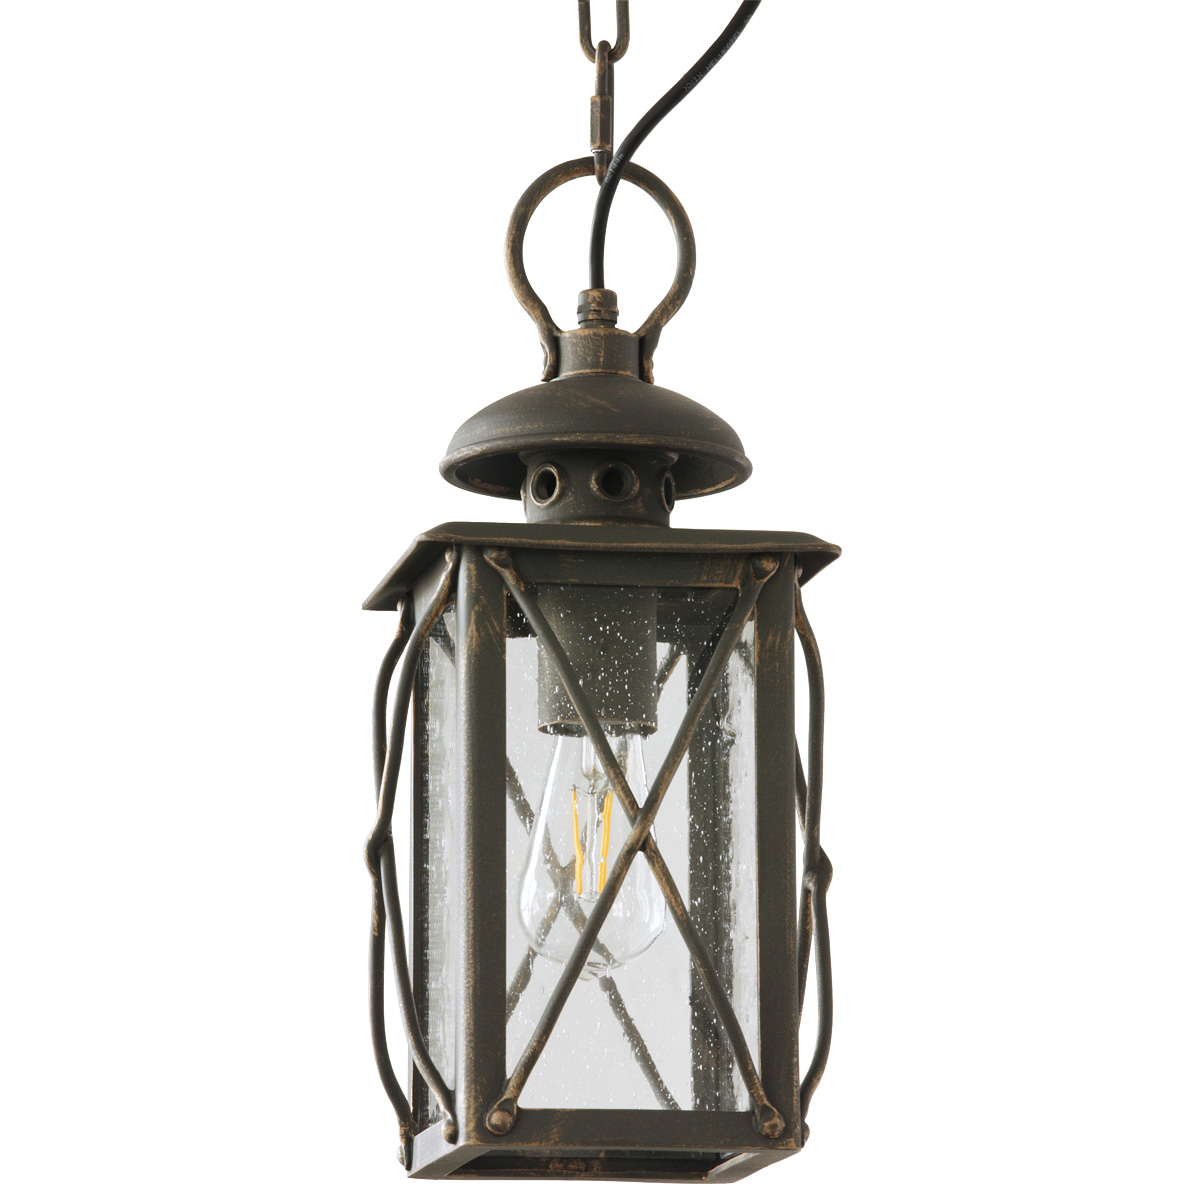 Exquisite Wrought Iron Pendant Light with Grill HL 2349-A